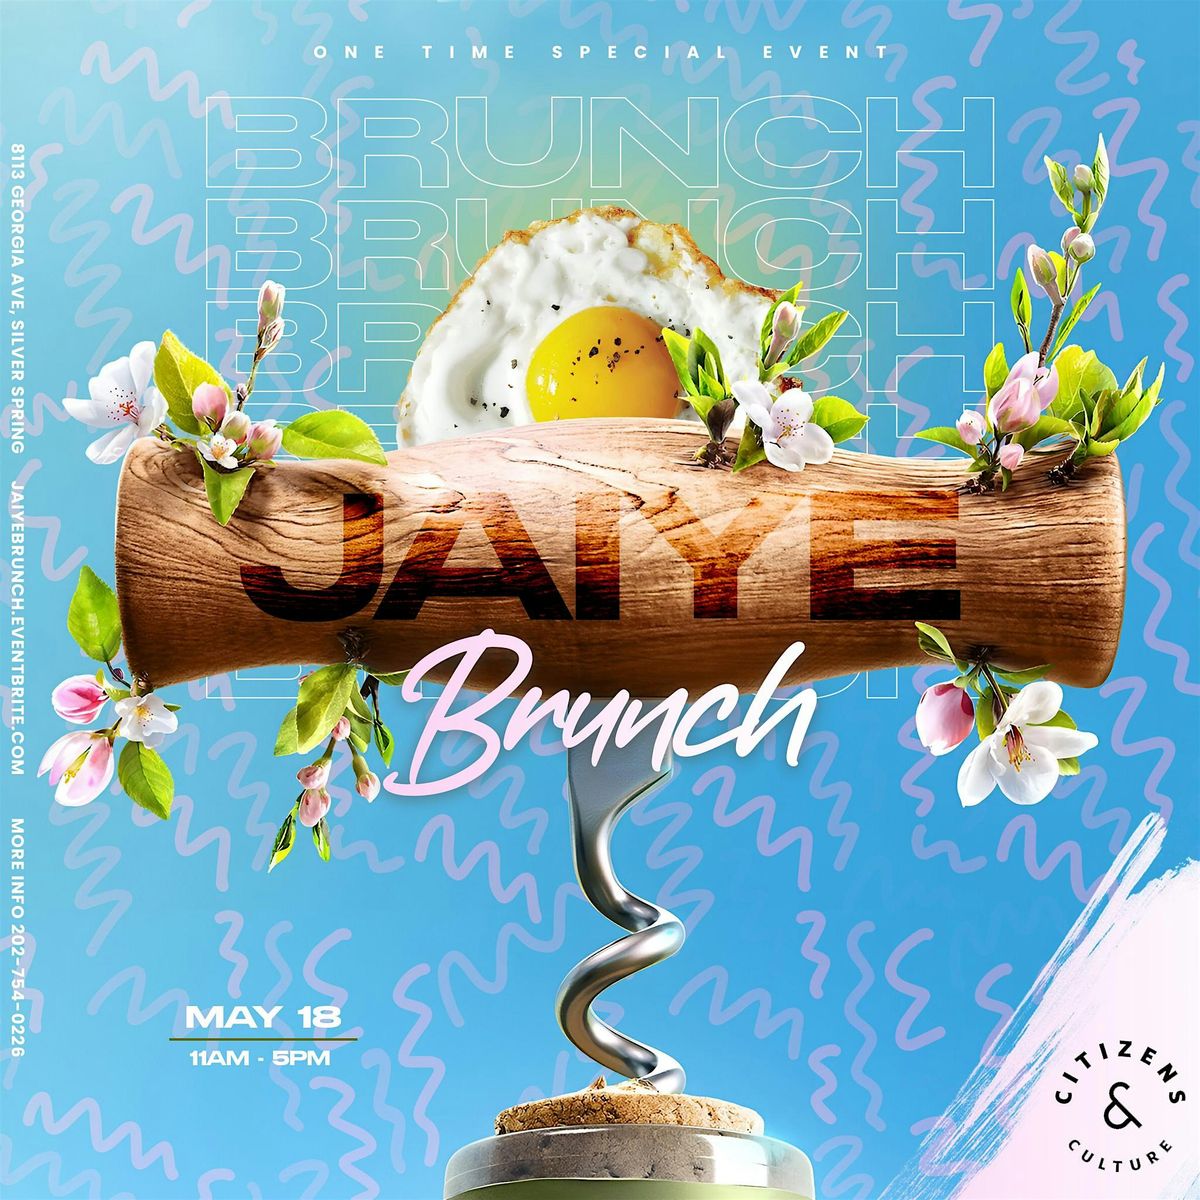 Jaiye Brunch | May 18th (Citizens & Culture)